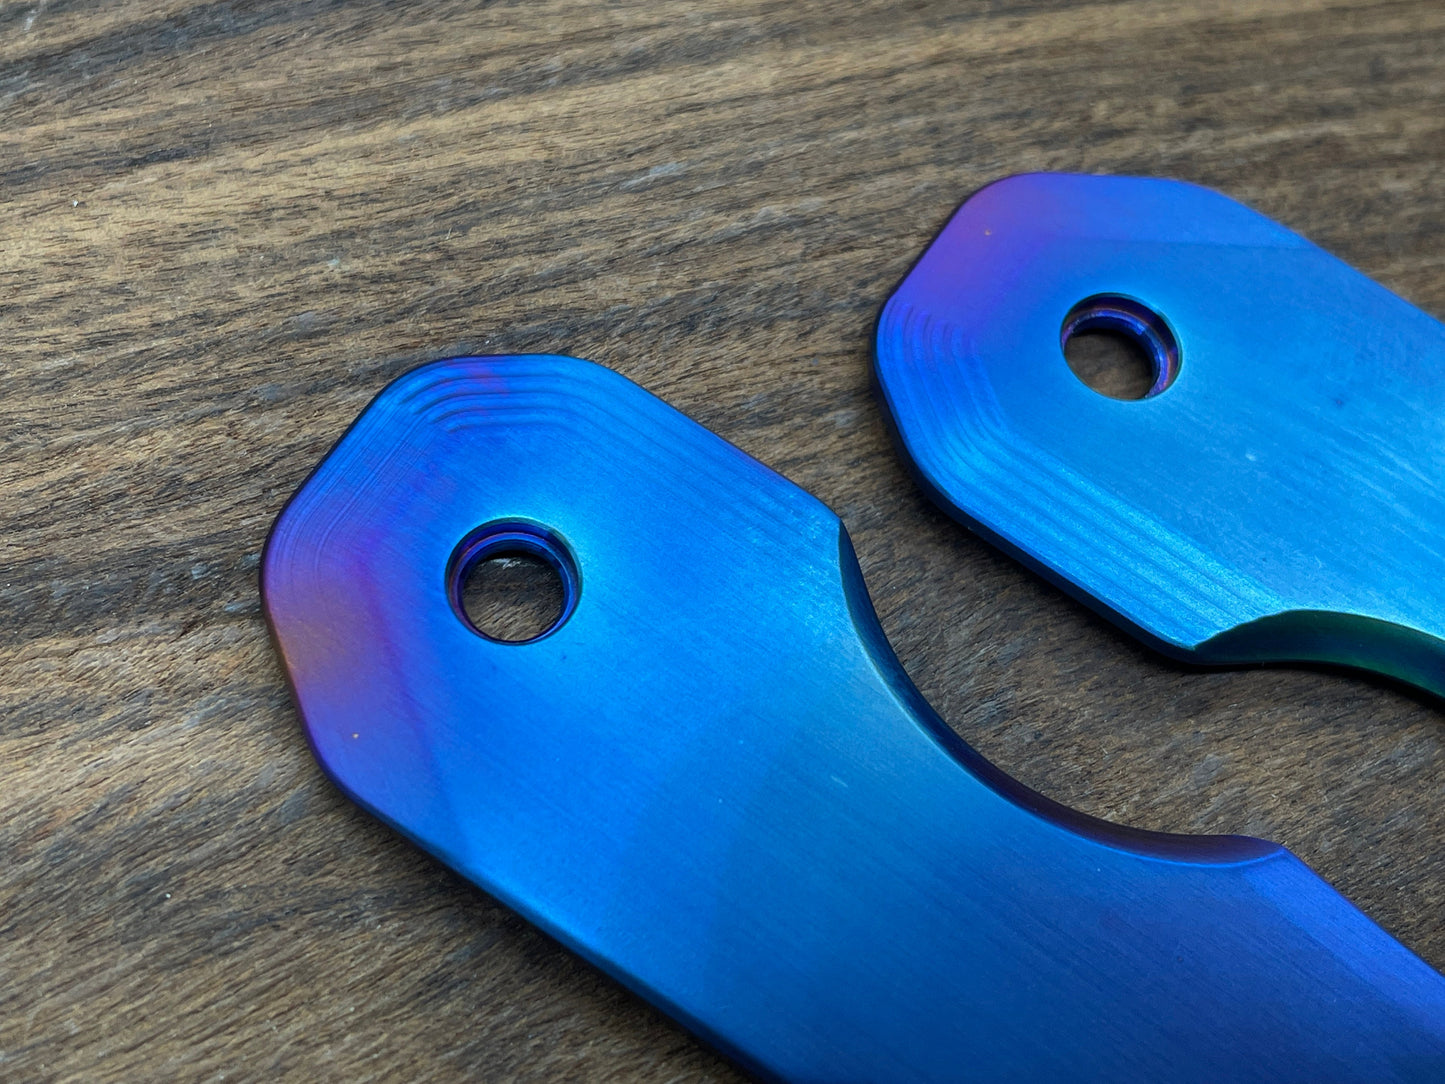 FLAMED Titanium Scales for Spyderco SMOCK